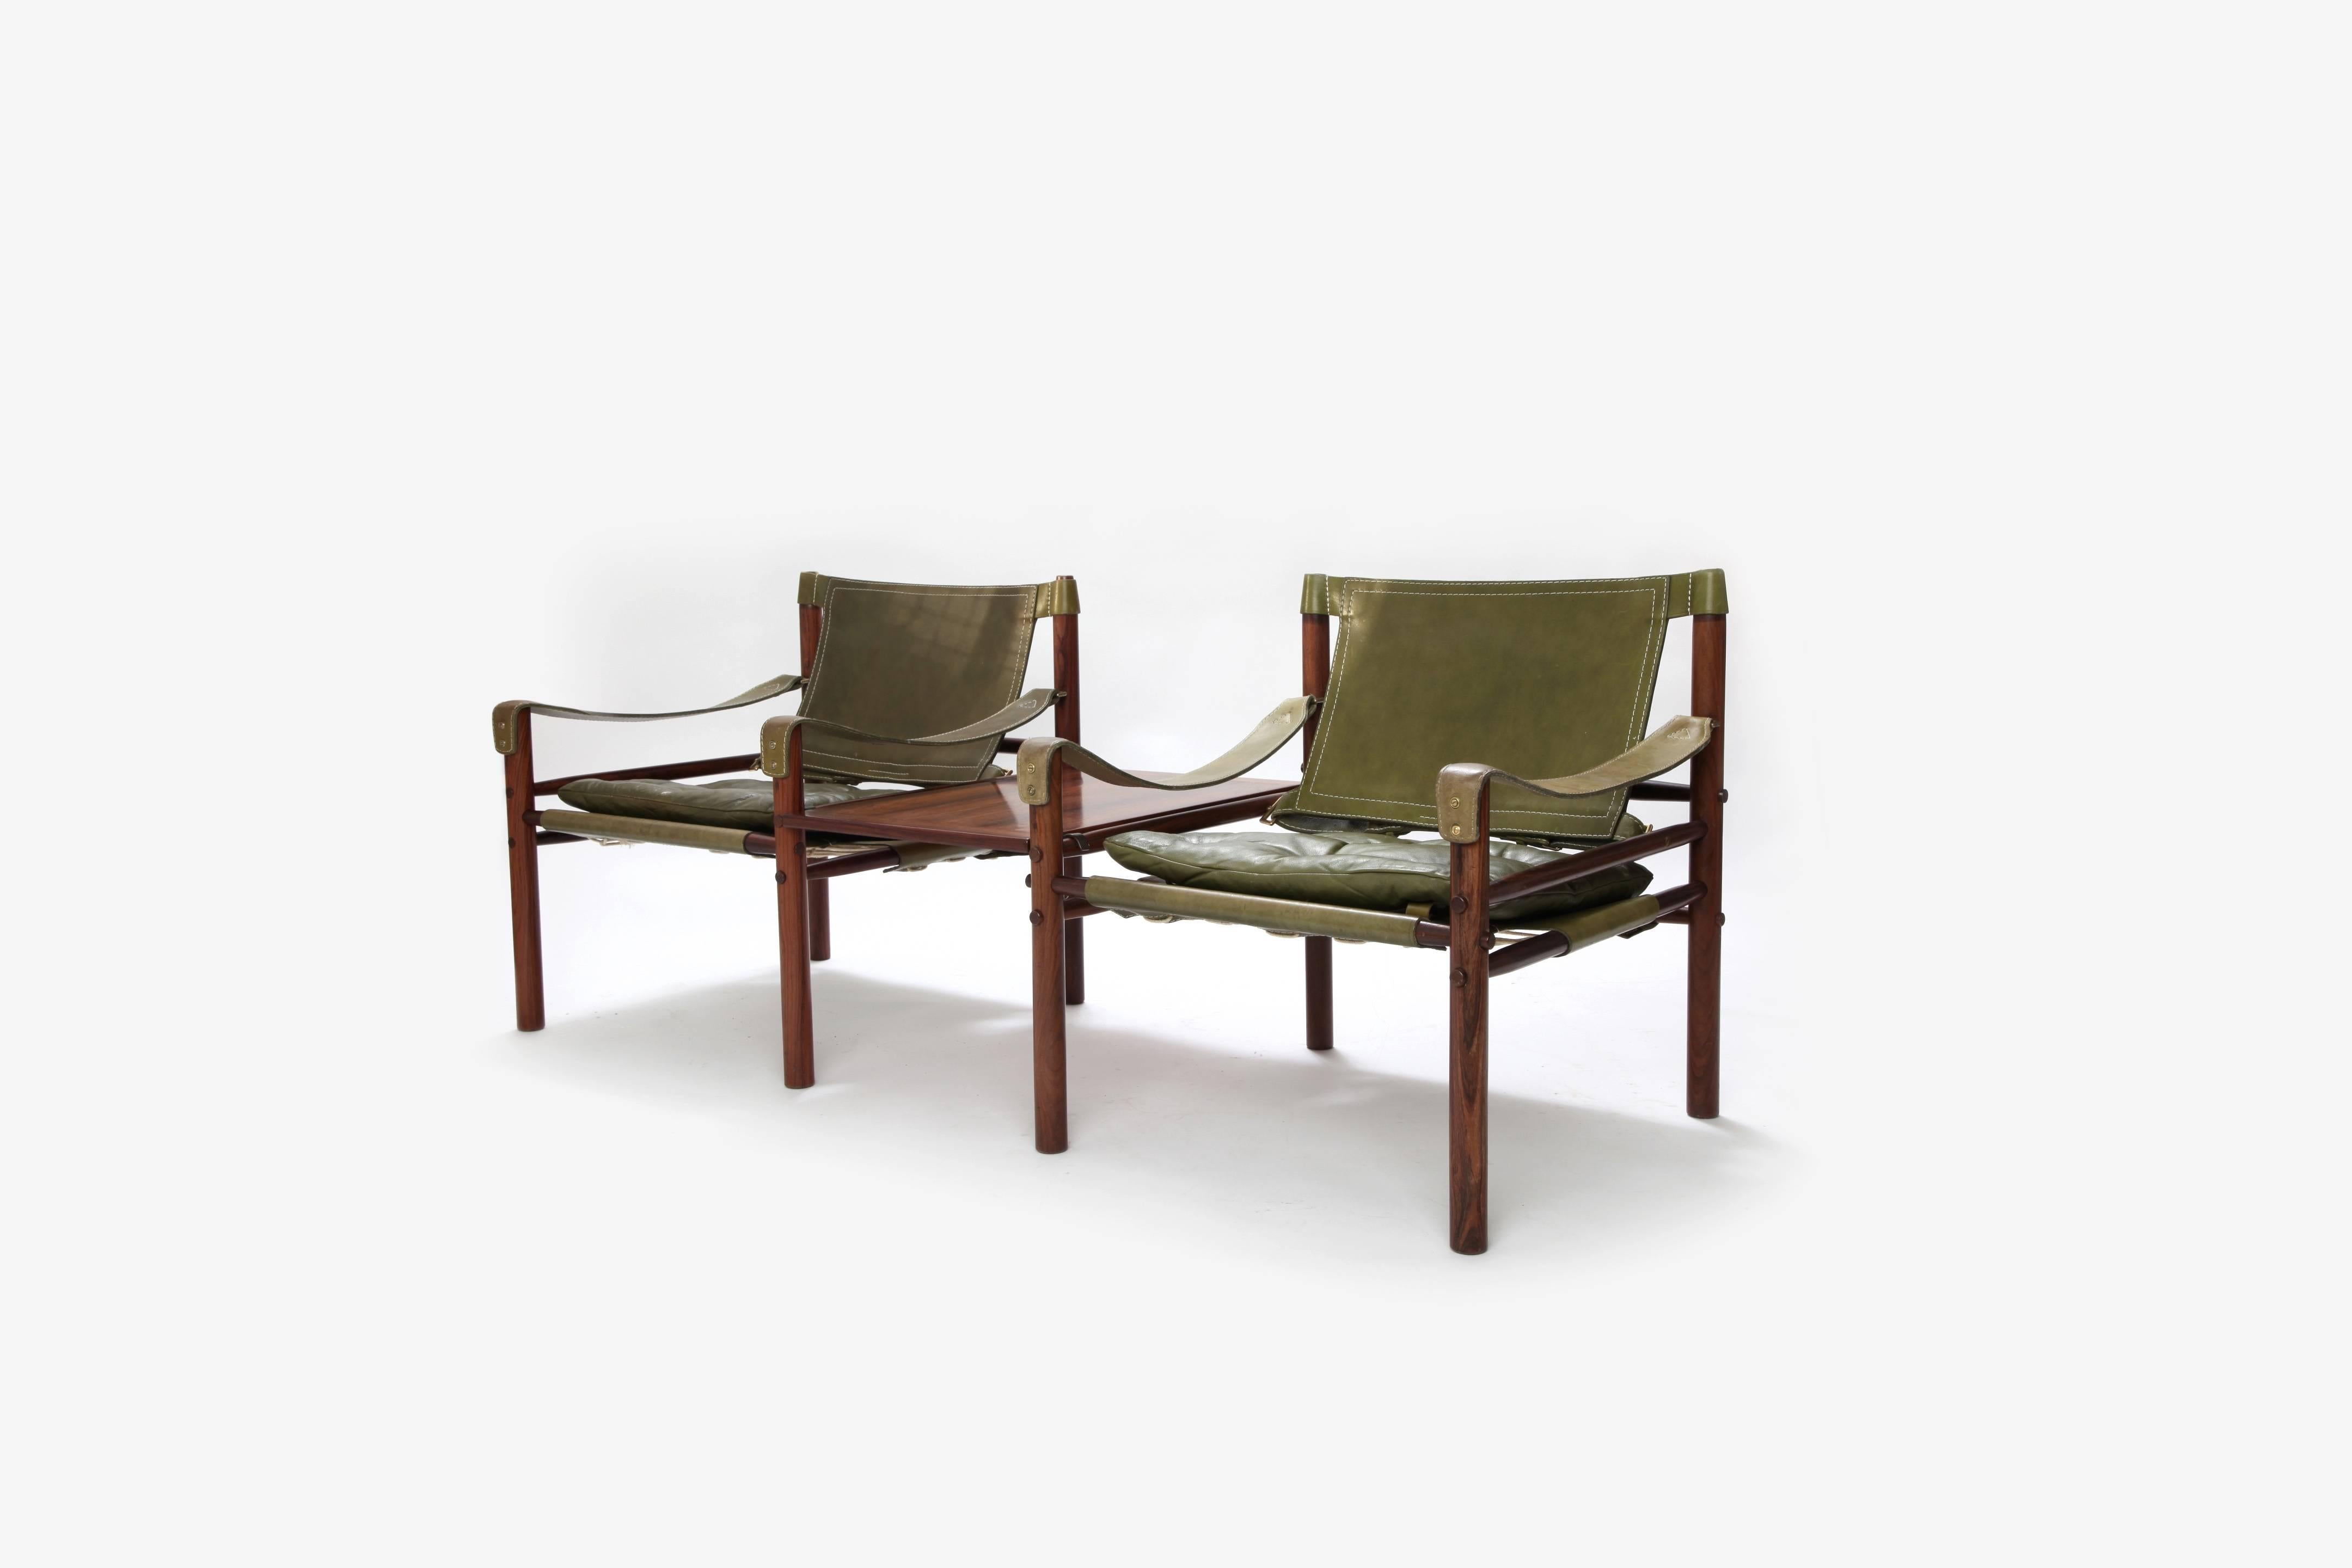 * complimentary US shipping during January *

A beautiful pair of rosewood Arne Norell Safari chairs with removable table. Made by Aneby Mobler in Sweden, 1960s. Fast and inexpensive shipping worldwide. The chairs will be disassembled for shipping